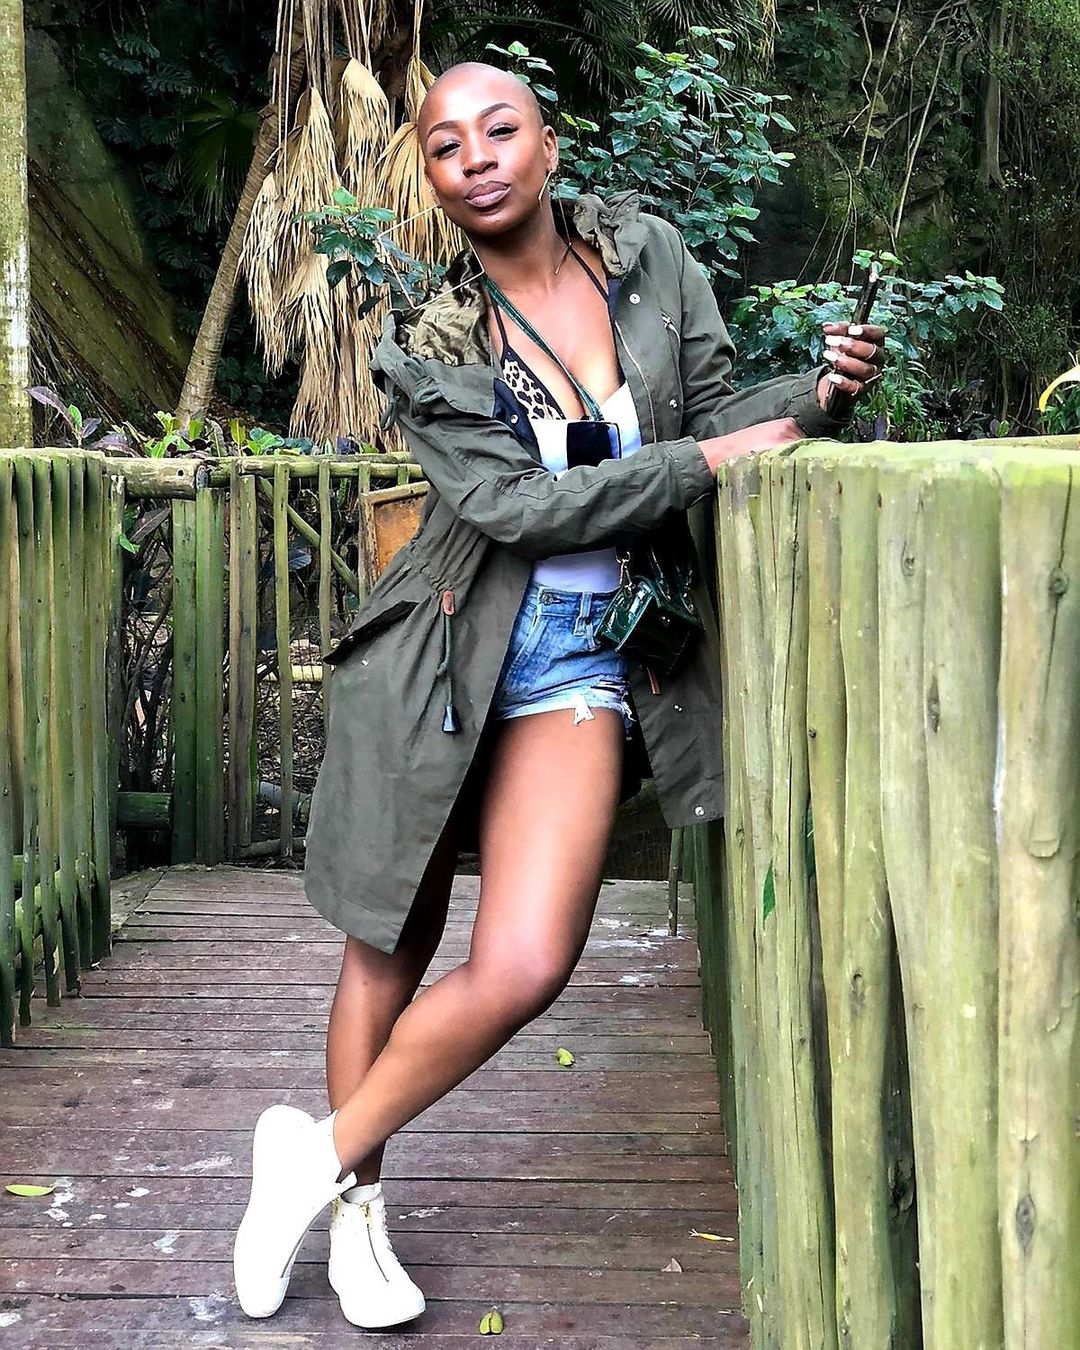 Actress Busisiwe Lurayi "Tumi" from How To Ruin Christmas suddenly dies in her home